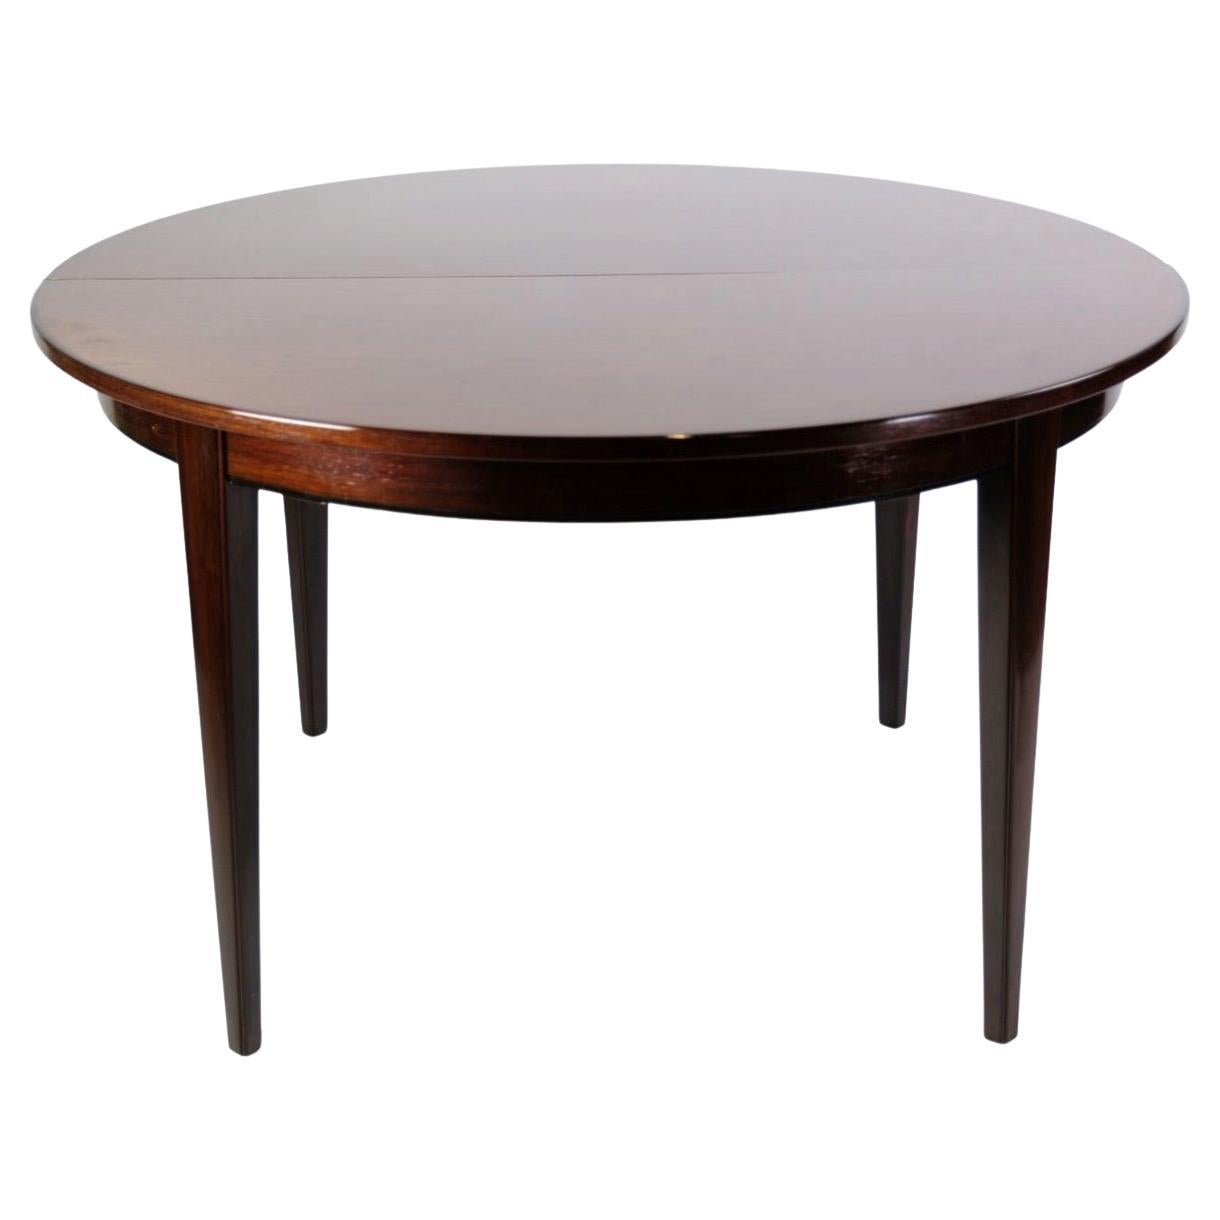 Dining Table Model No. 55 Made In Rosewood Designed By Omann Jun A/S From 1960s